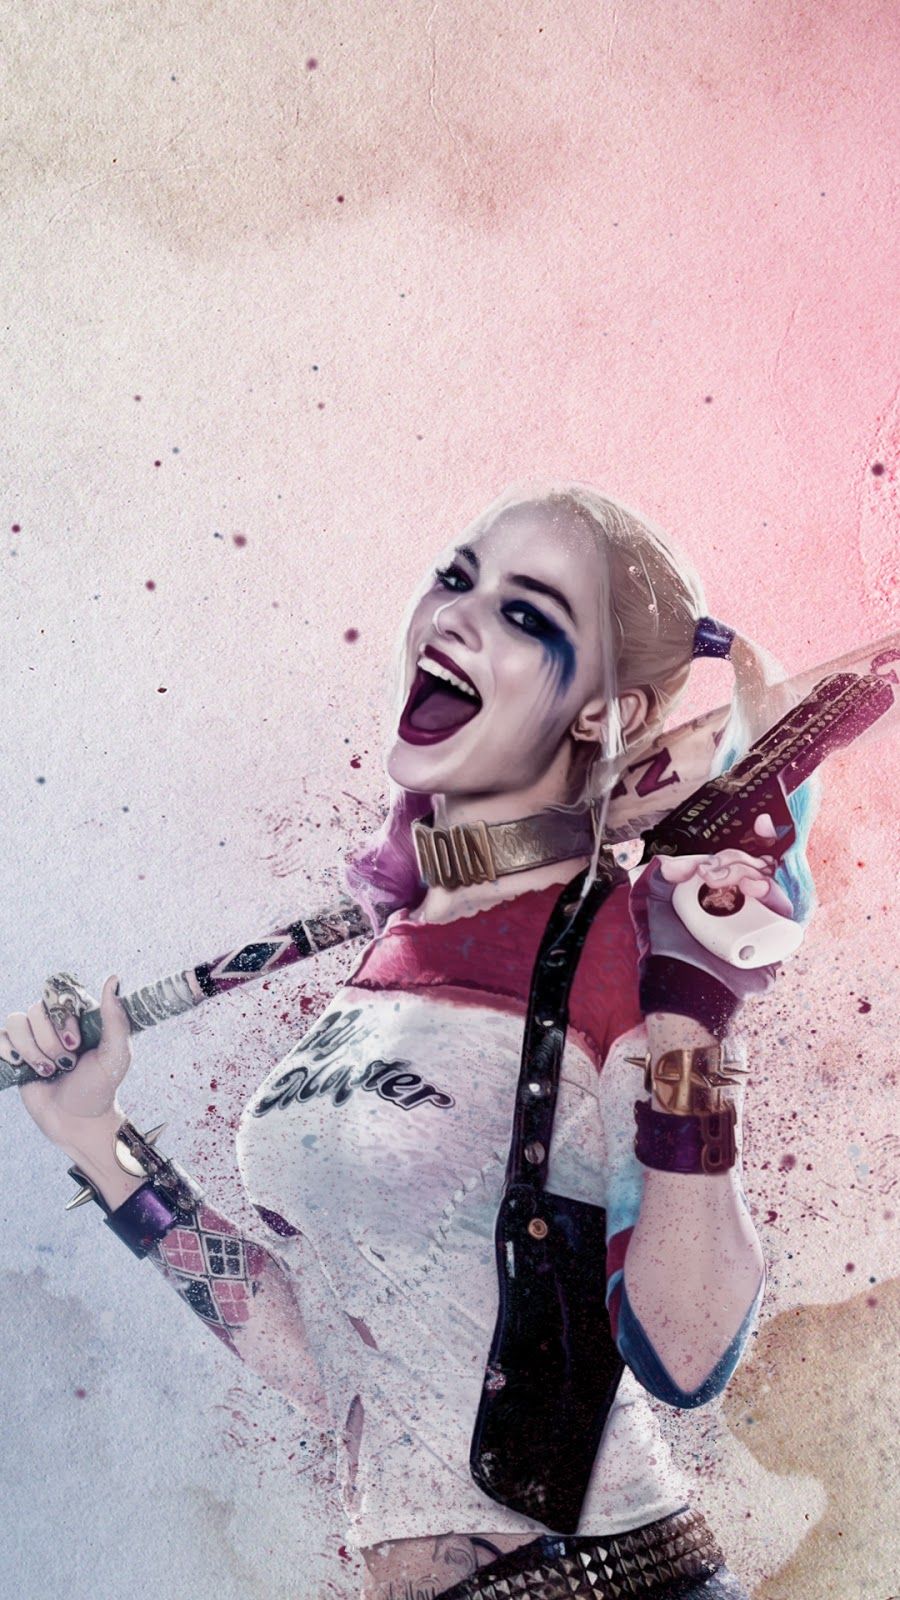 Harley Quinn Live Android Wallpapers